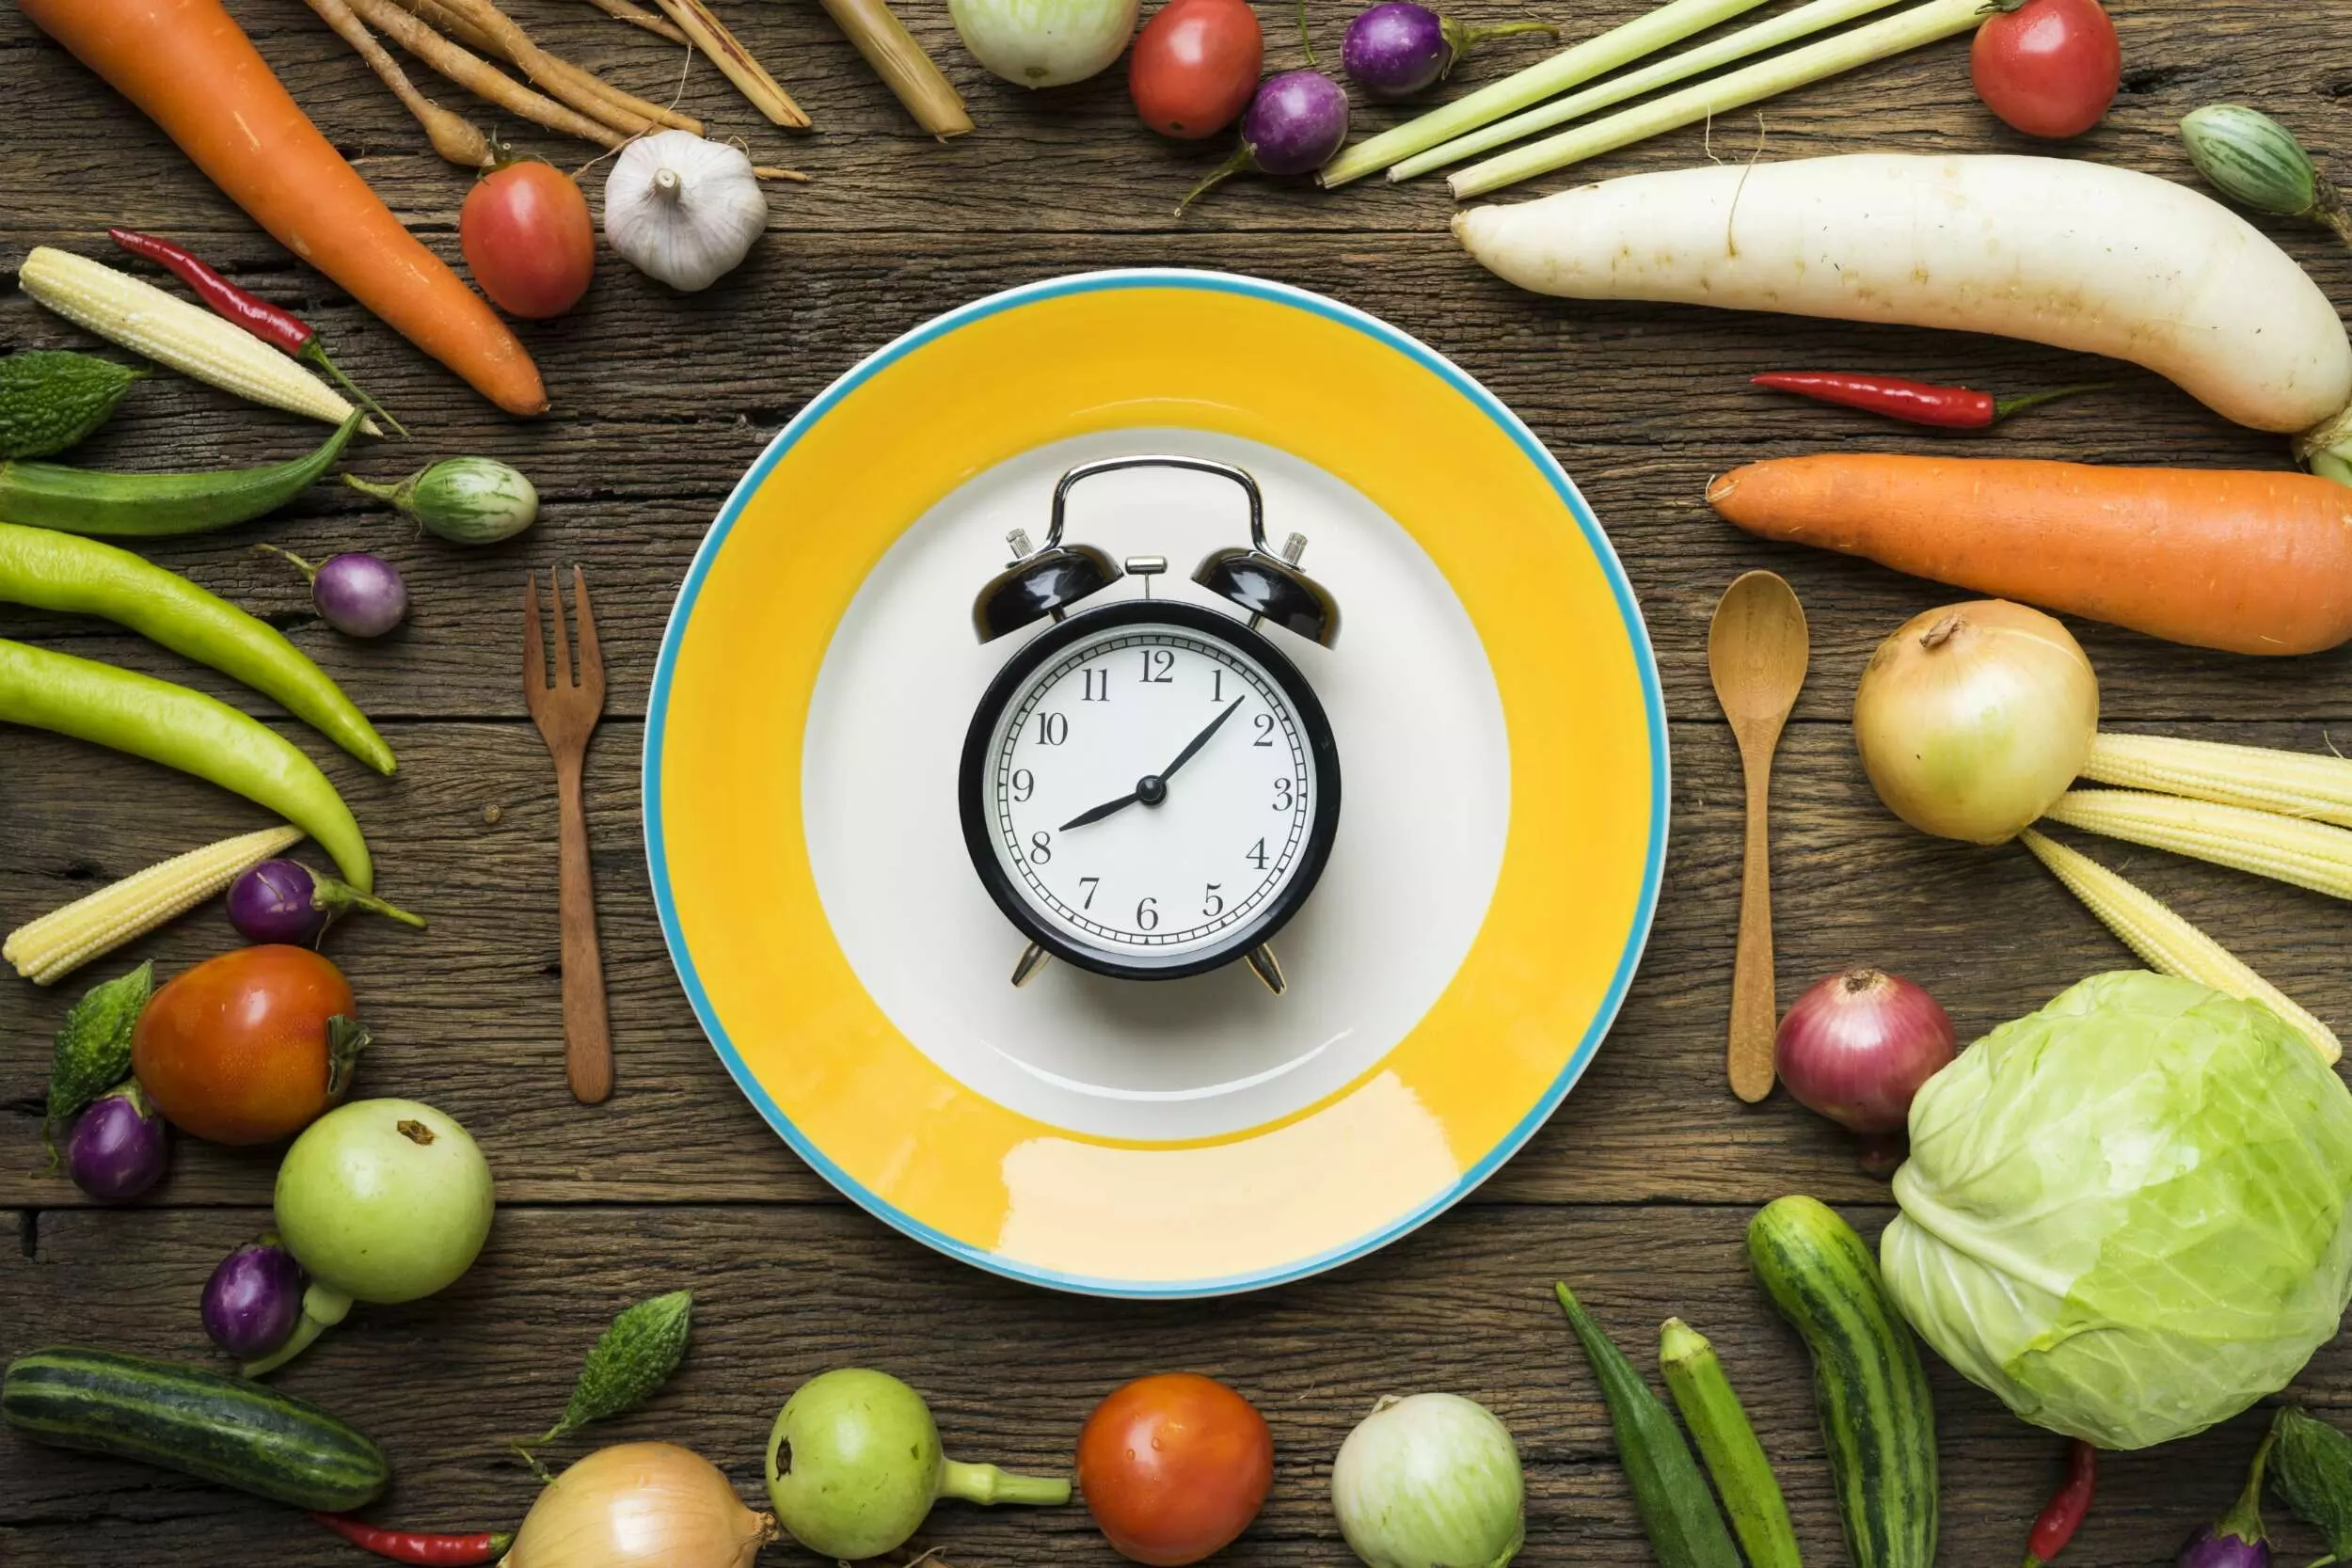 Timing of intake of specific foods Improves Survival in Diabetes Patients